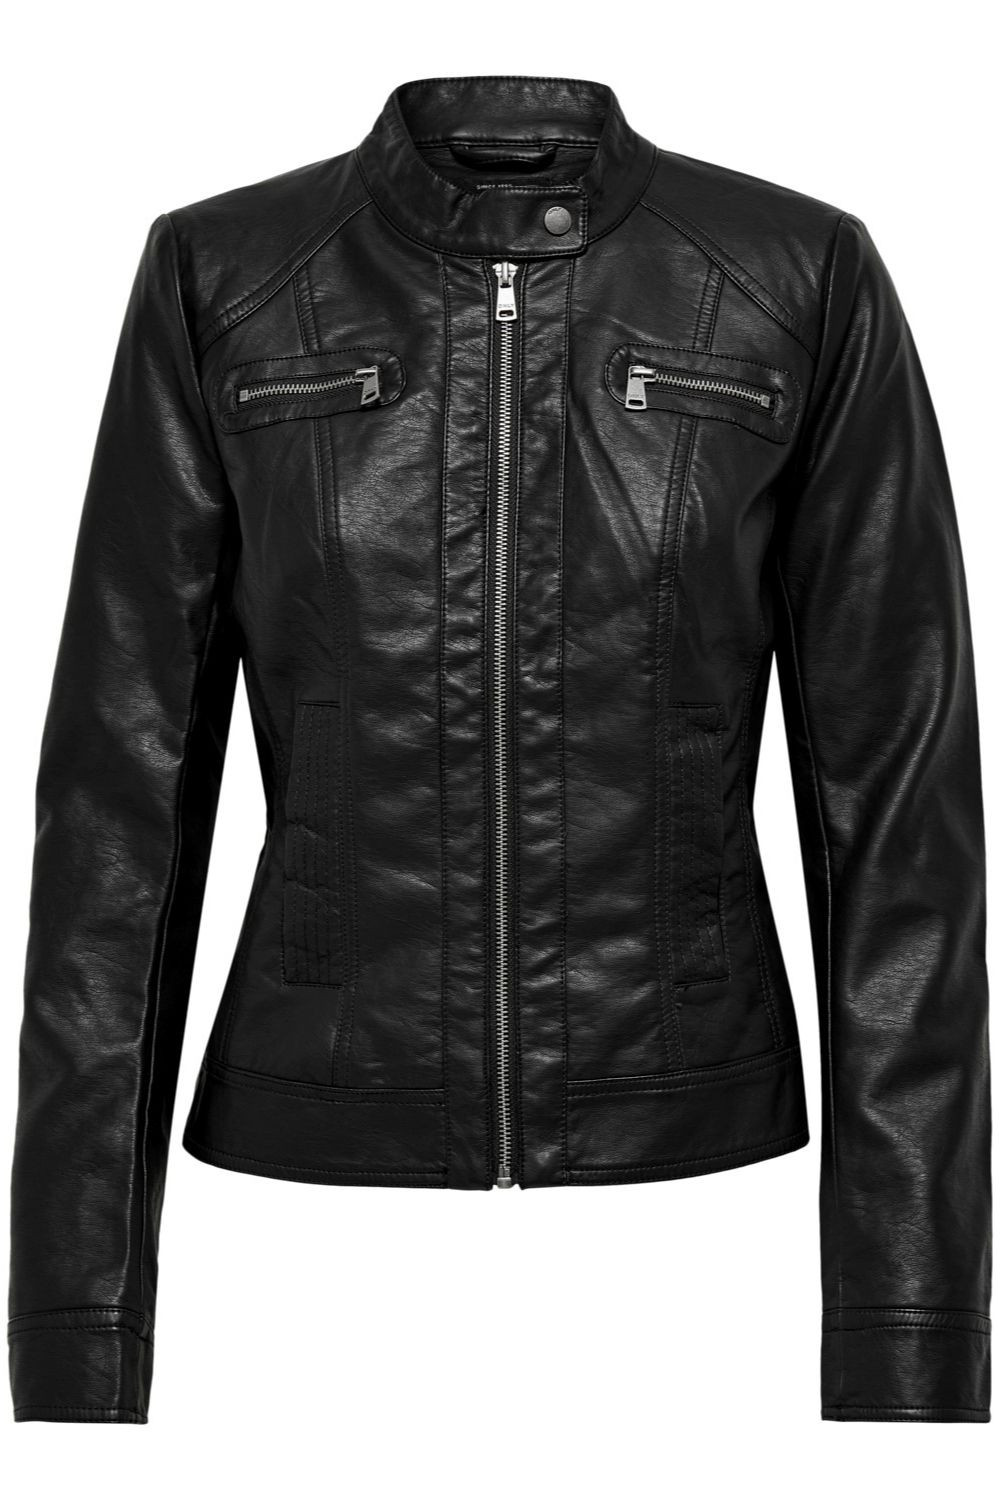 Only Bandit Faux Leather Biker Jacket in Black | iCLOTHING